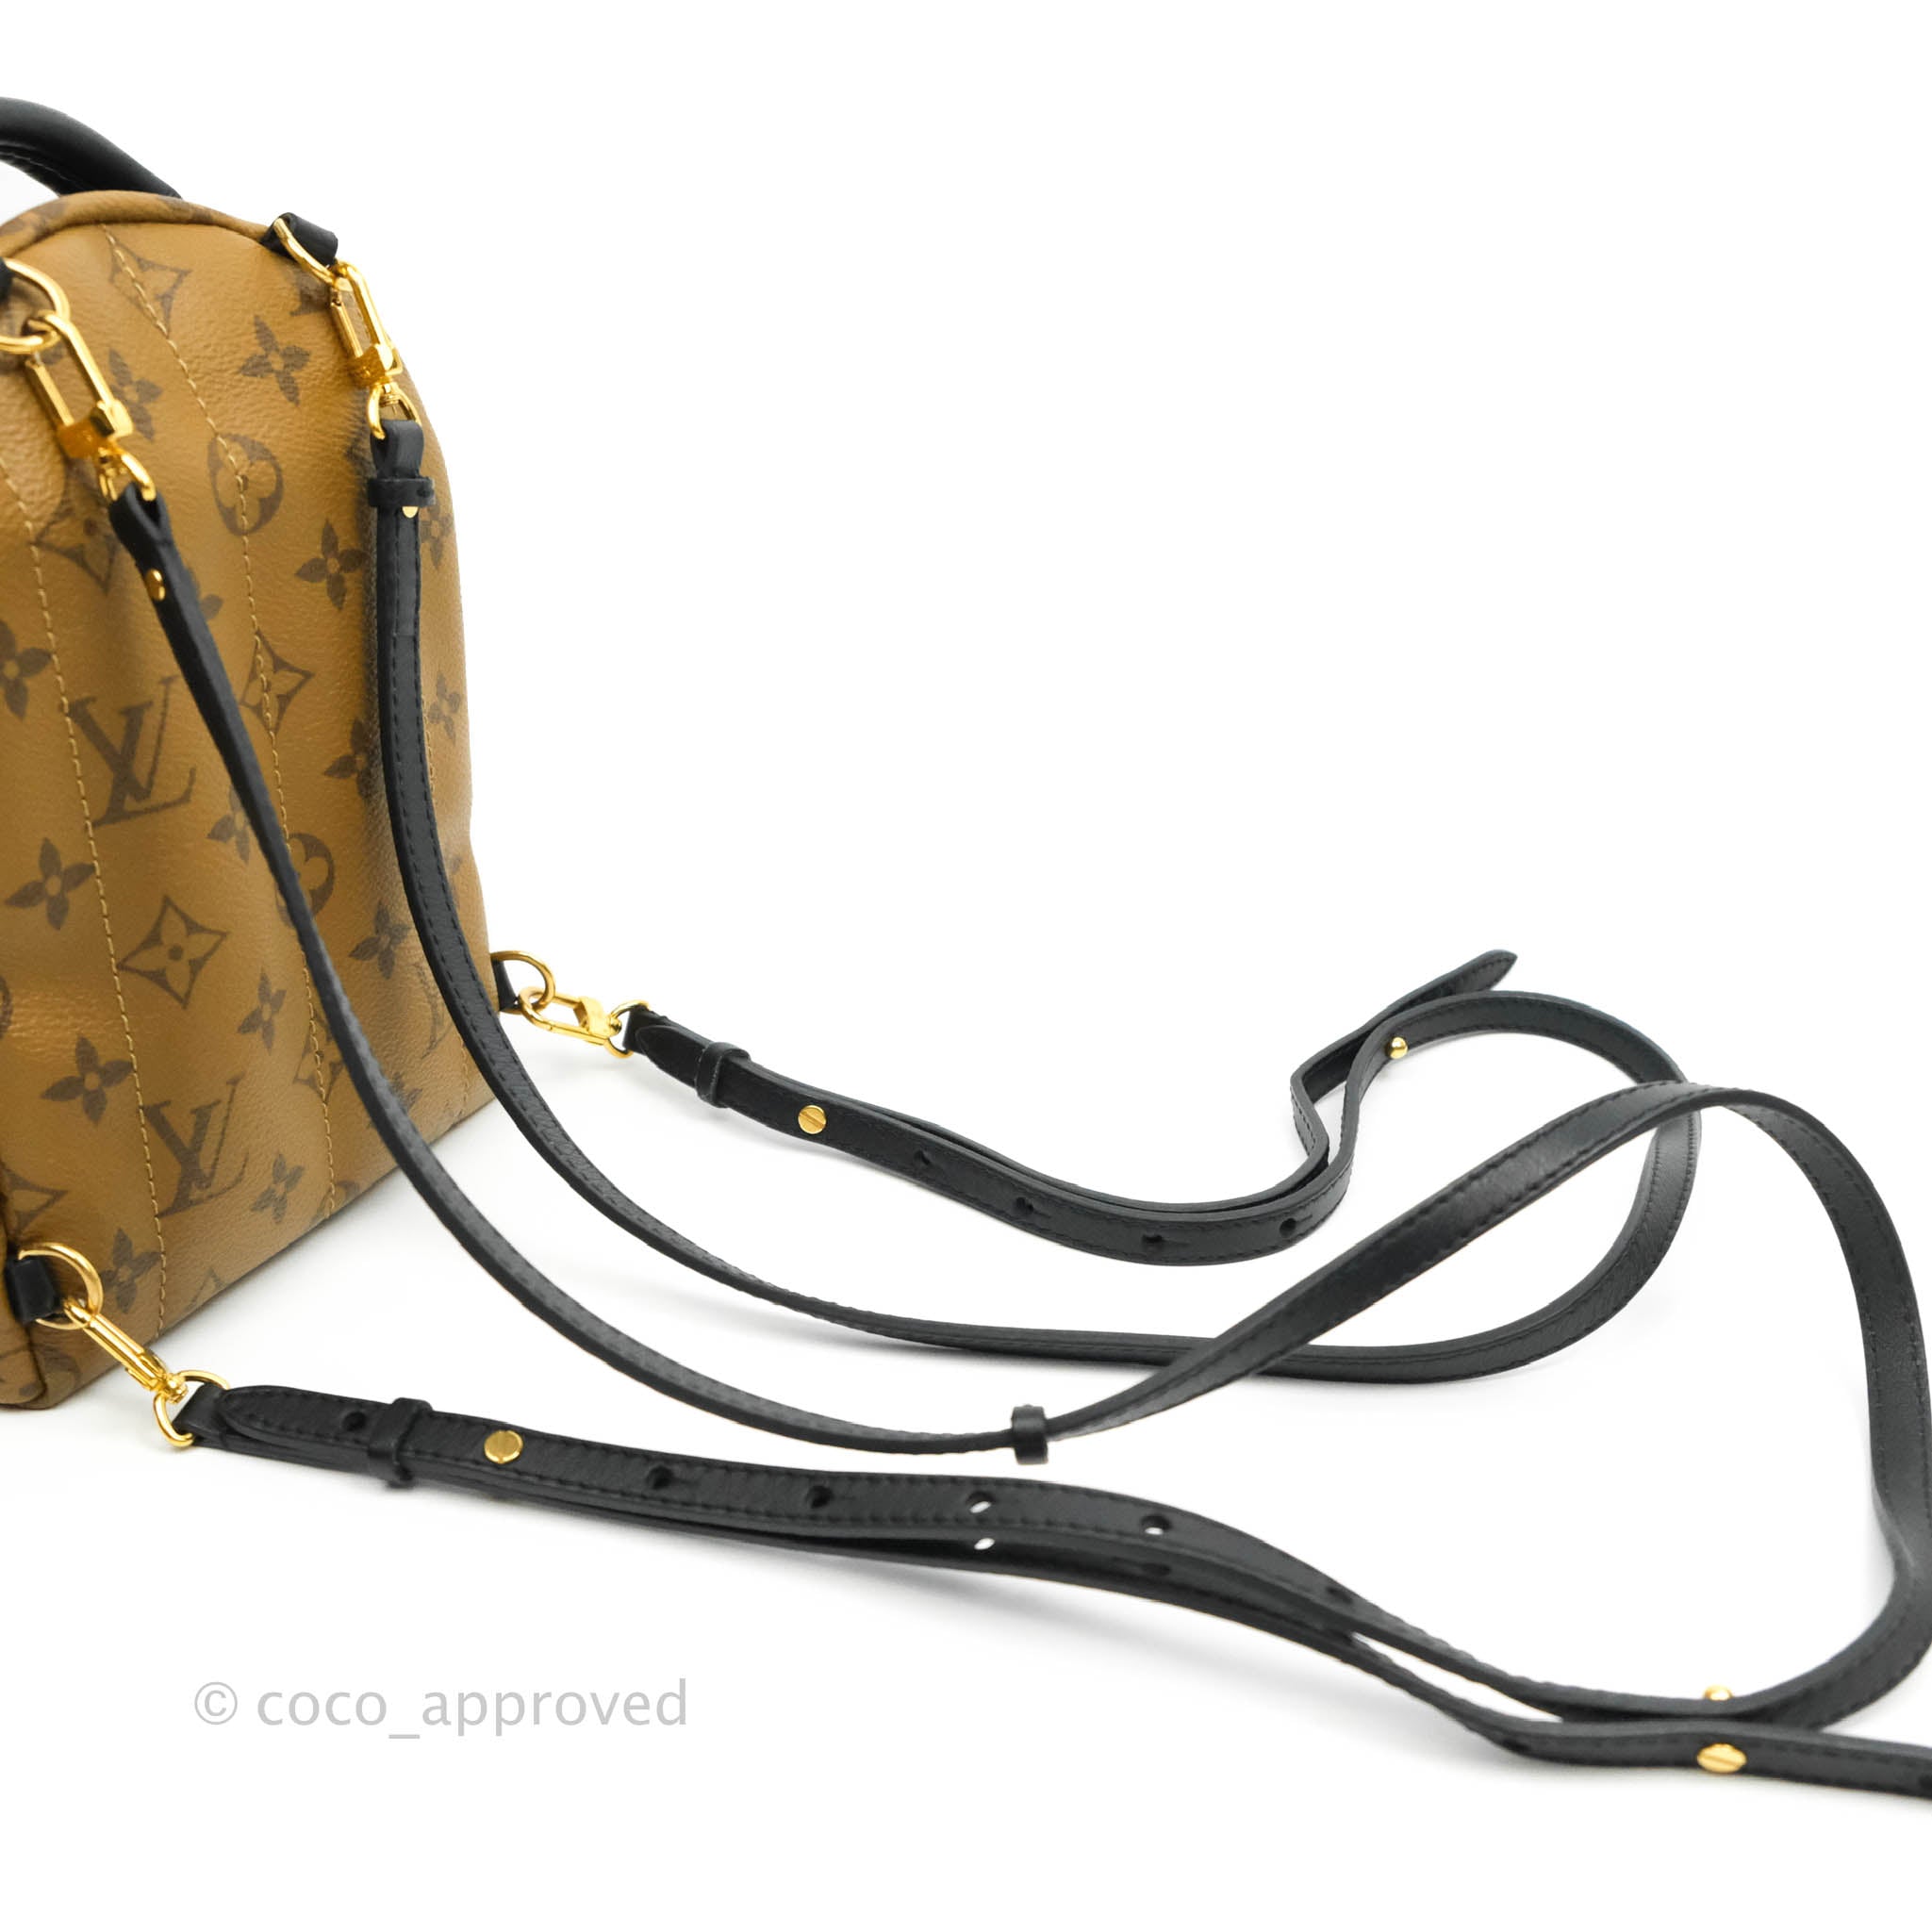 Louis Vuitton Mini Monogram Palm Springs Backpack by Ann's Fabulous Finds